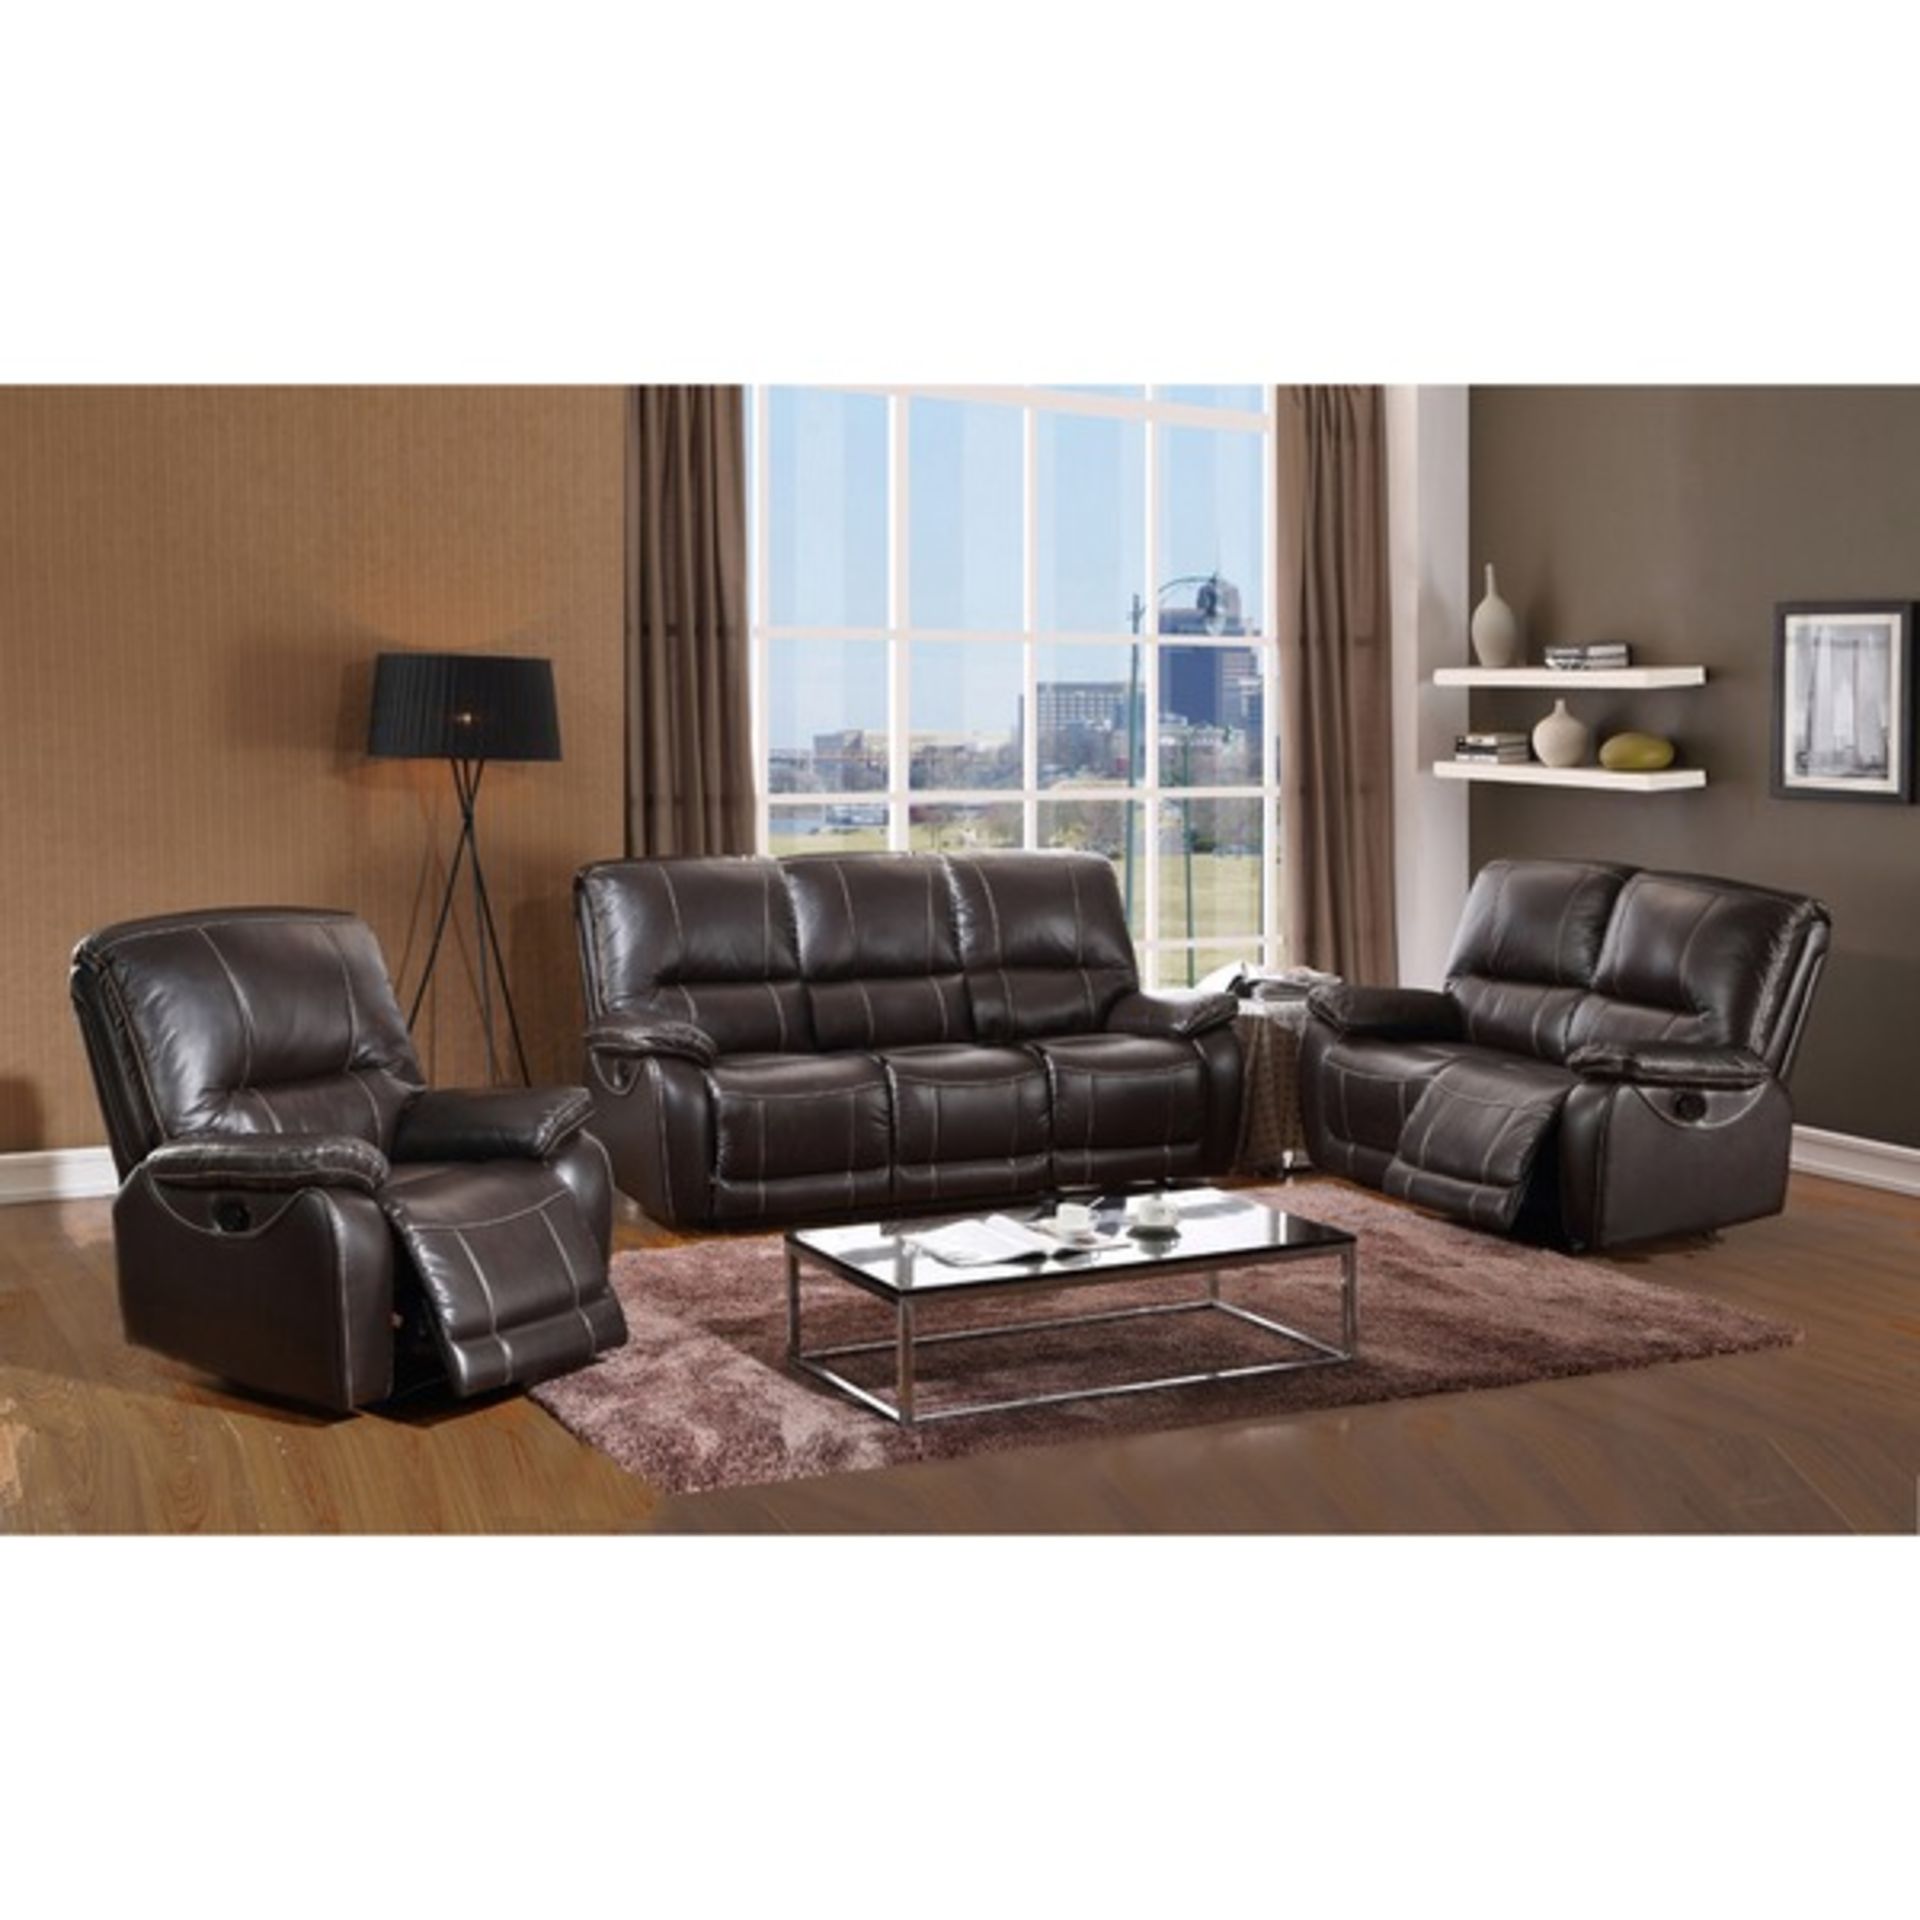 Brand new direct from the manufacturers Warrier 3 seater plus 2 seater leather air fabric